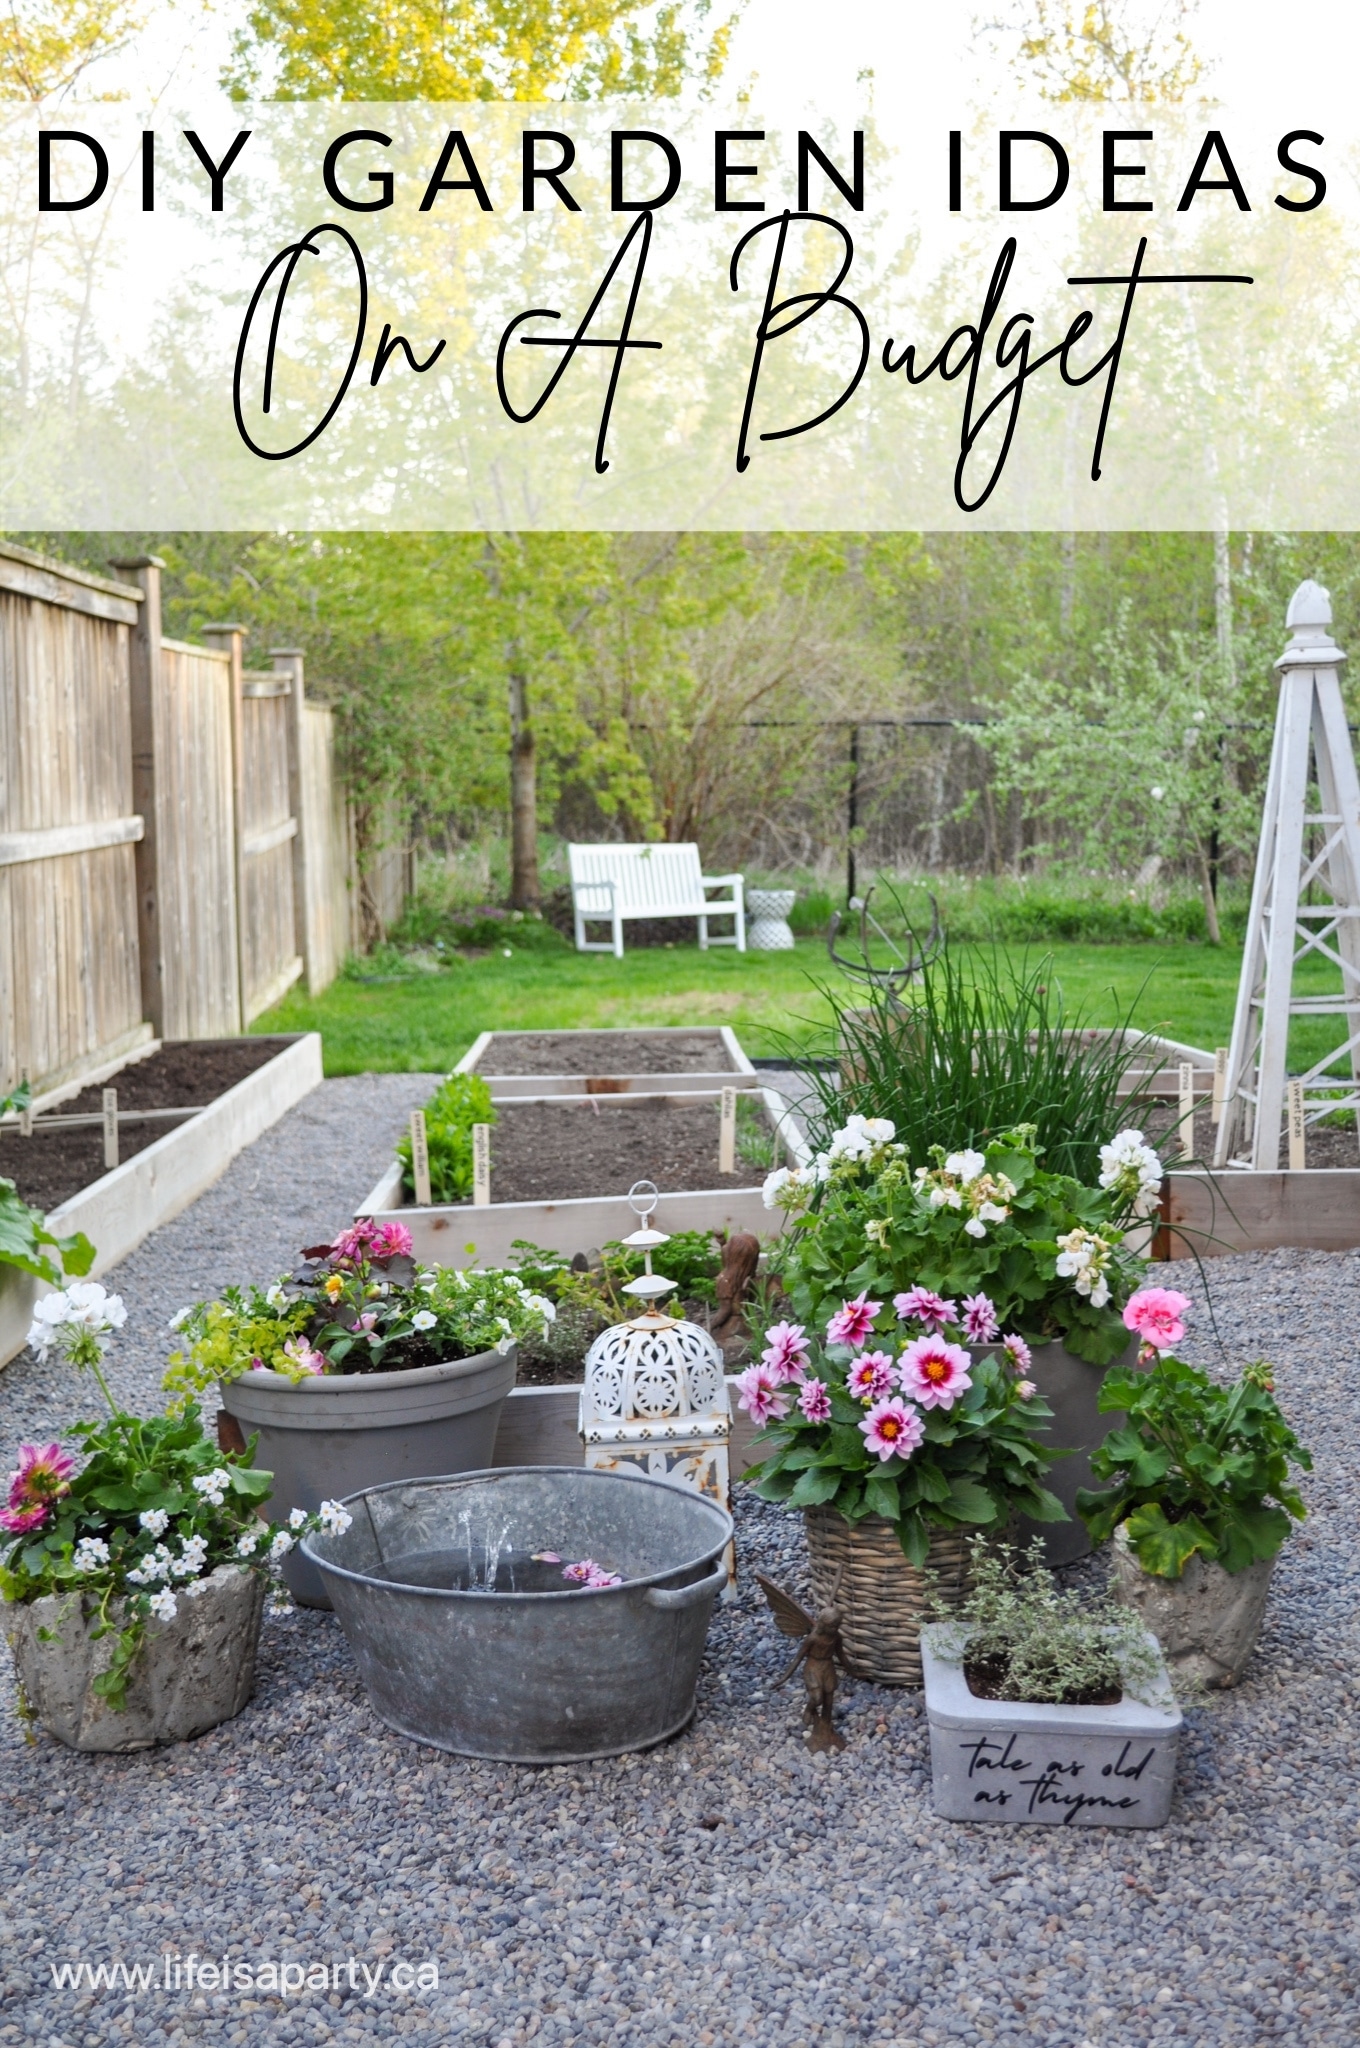 DIY Garden Ideas On A Budget -decorate your outdoor spaces on a budget with these easy and inexpensive project ideas using your Cricut.